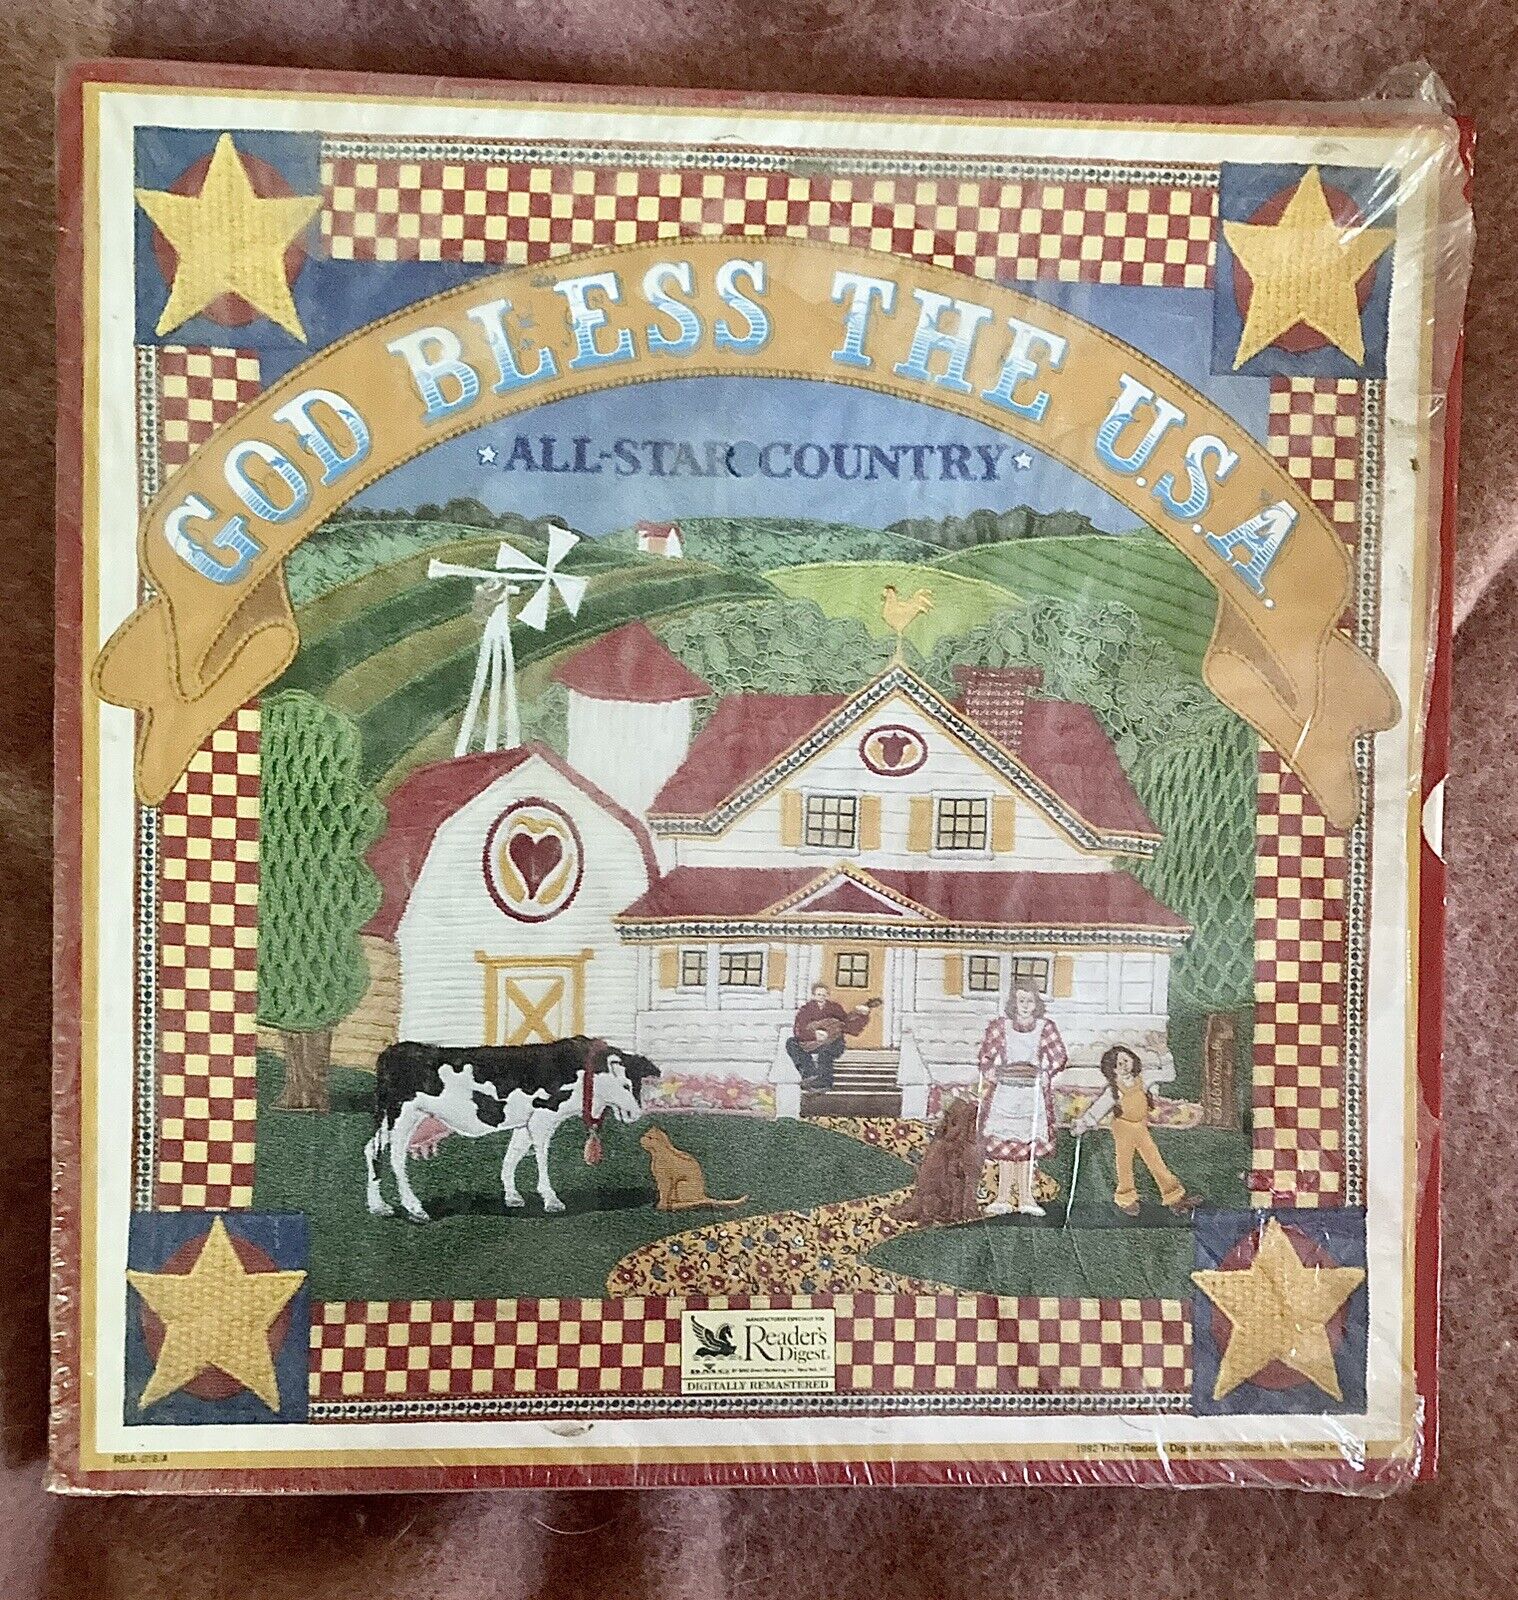 VTG Readers Digest God Bless The USA All Start Country LP Collection